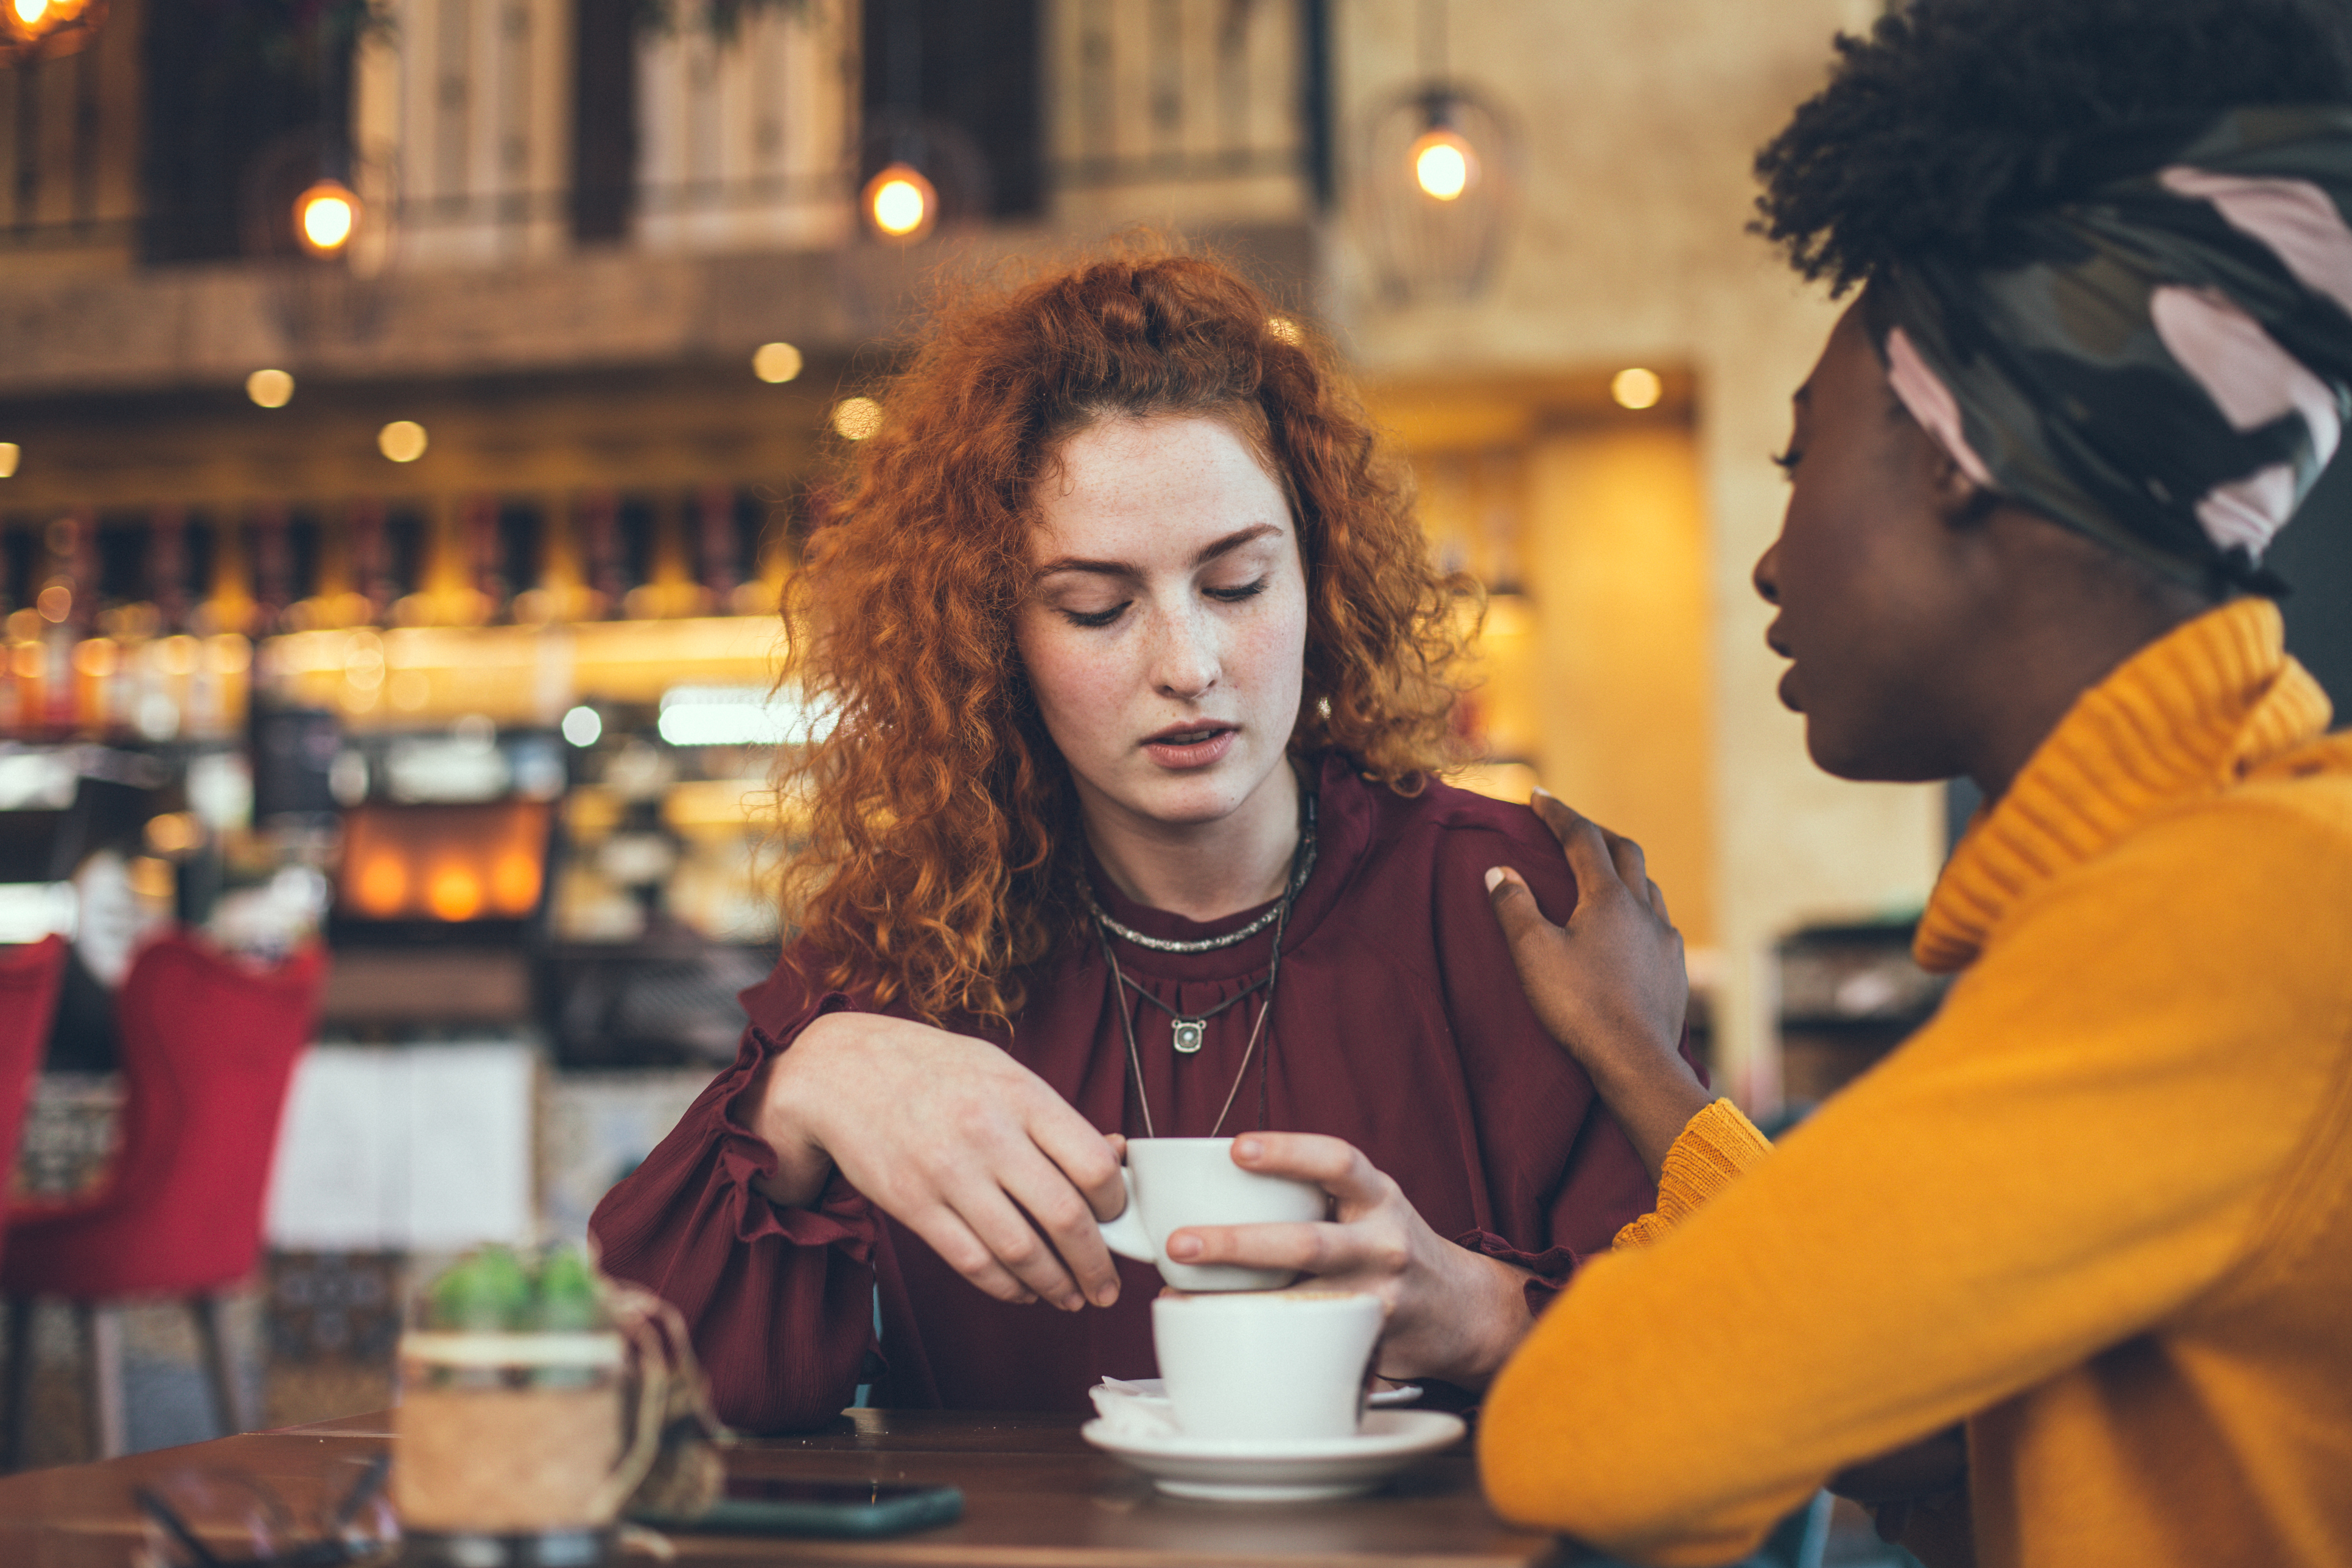 Two women having a conversation in a coffee shop